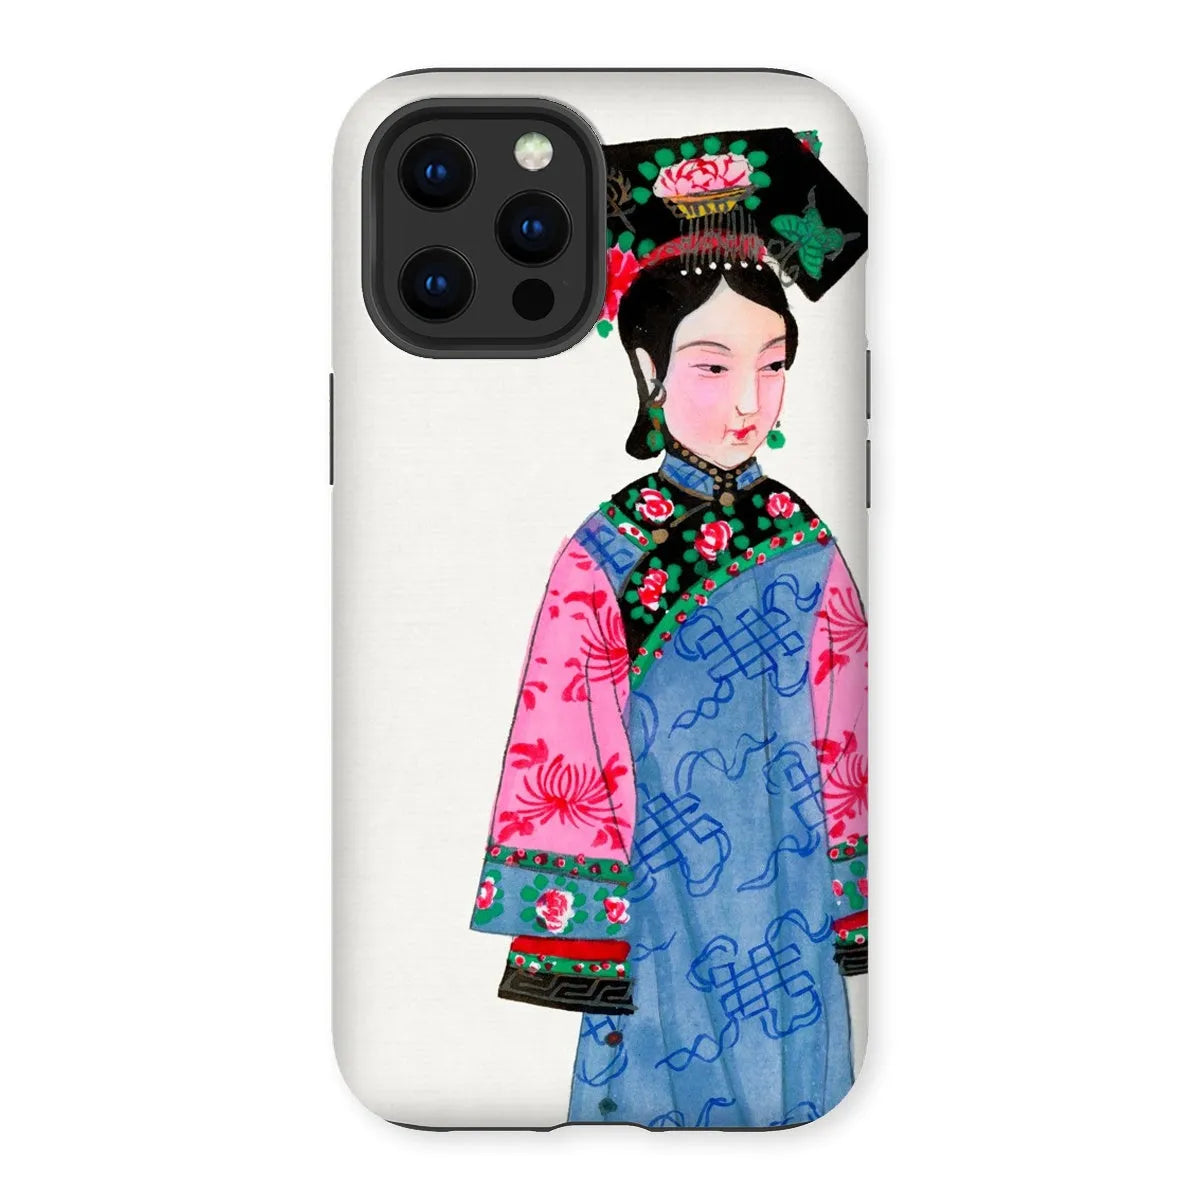 Noblewoman Too - Manchu Aesthetic Art Phone Case - Iphone 13 Pro Max / Matte - Mobile Phone Cases - Aesthetic Art